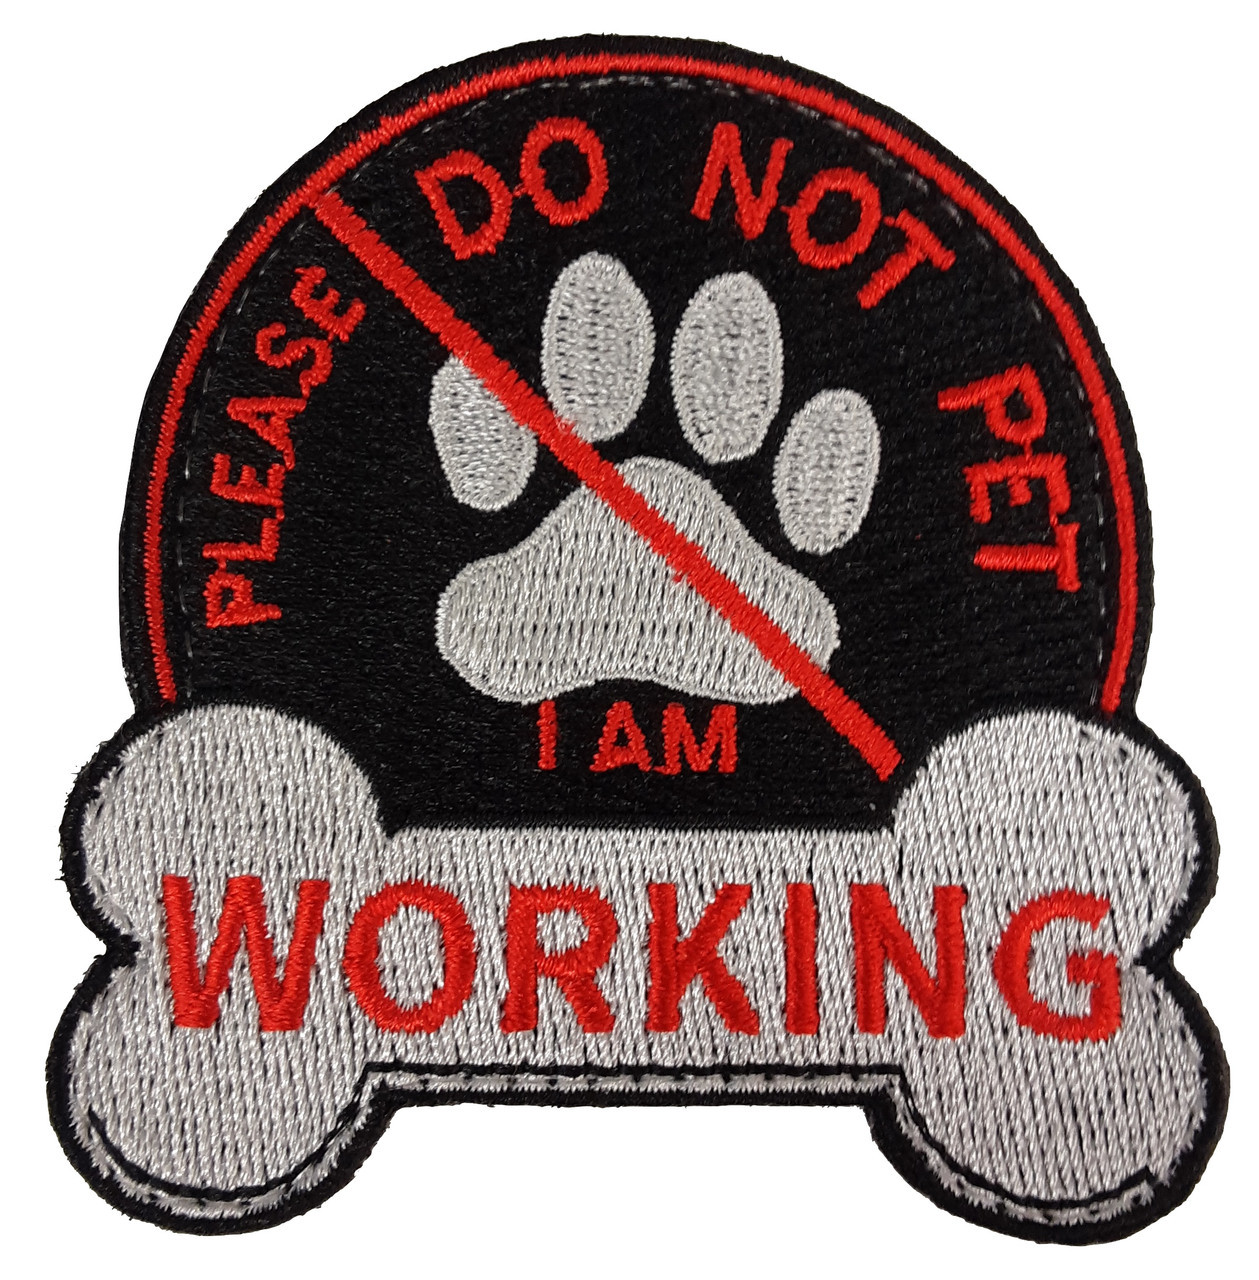 Do Not Pet - Im Working Service Dog Patch, Specialty Patches